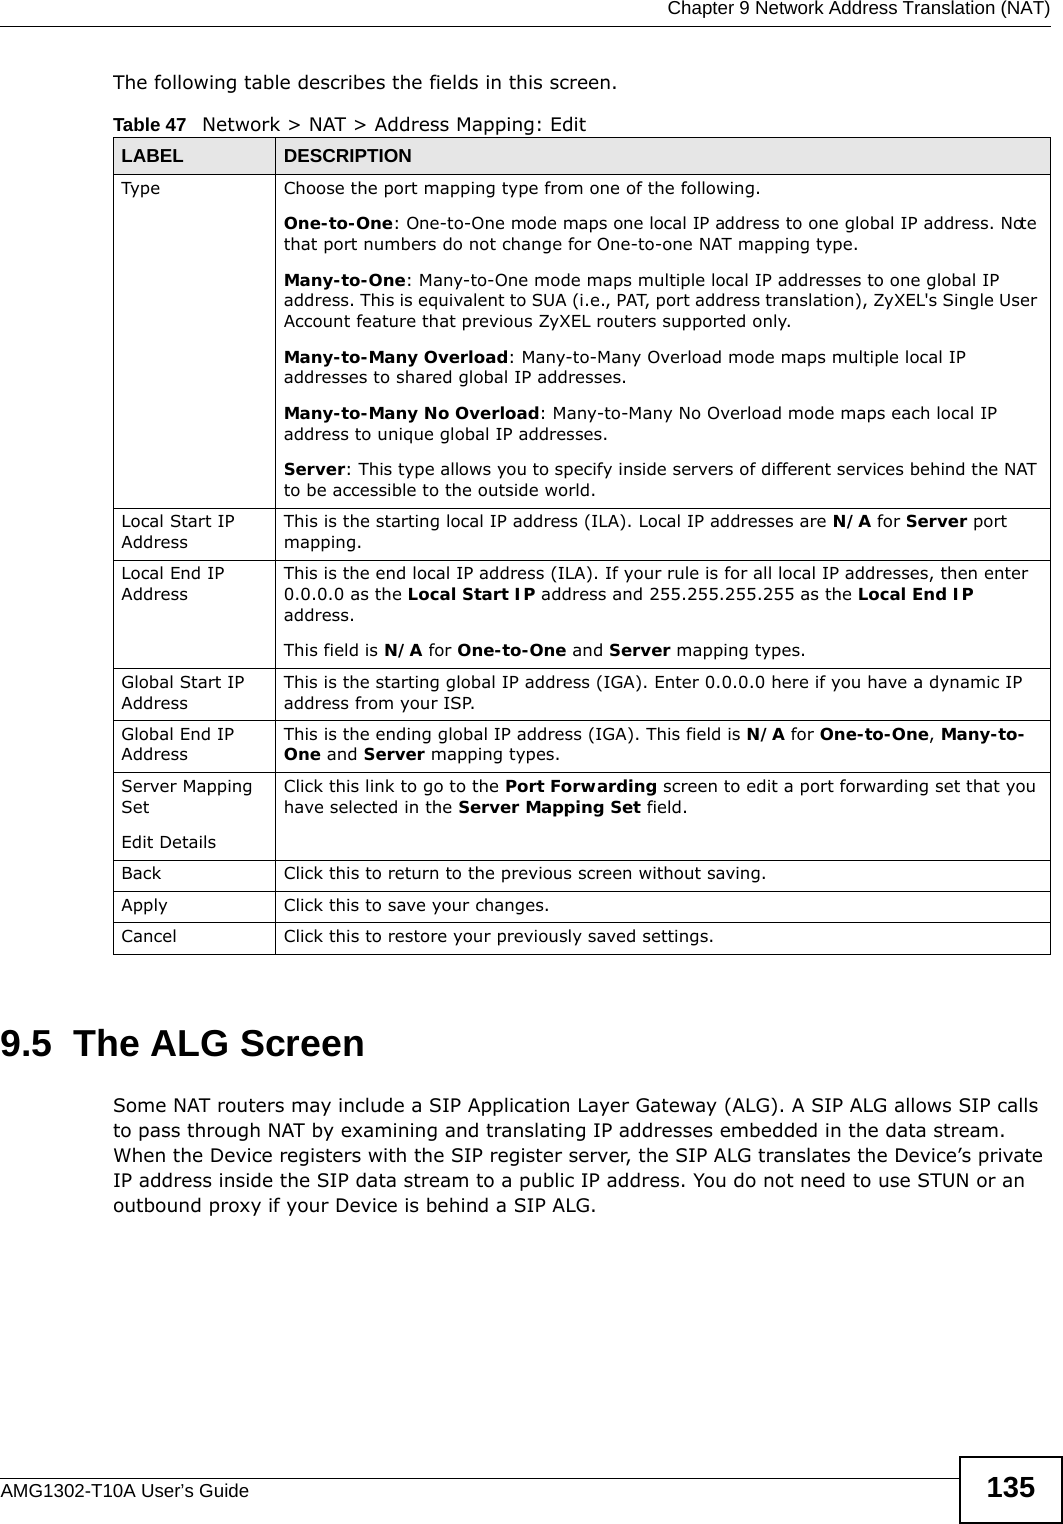  Chapter 9 Network Address Translation (NAT)AMG1302-T10A User’s Guide 135The following table describes the fields in this screen.9.5  The ALG ScreenSome NAT routers may include a SIP Application Layer Gateway (ALG). A SIP ALG allows SIP calls to pass through NAT by examining and translating IP addresses embedded in the data stream. When the Device registers with the SIP register server, the SIP ALG translates the Device’s private IP address inside the SIP data stream to a public IP address. You do not need to use STUN or an outbound proxy if your Device is behind a SIP ALG.Table 47   Network &gt; NAT &gt; Address Mapping: Edit LABEL DESCRIPTIONType Choose the port mapping type from one of the following. One-to-One: One-to-One mode maps one local IP address to one global IP address. Note that port numbers do not change for One-to-one NAT mapping type.Many-to-One: Many-to-One mode maps multiple local IP addresses to one global IP address. This is equivalent to SUA (i.e., PAT, port address translation), ZyXEL&apos;s Single User Account feature that previous ZyXEL routers supported only. Many-to-Many Overload: Many-to-Many Overload mode maps multiple local IP addresses to shared global IP addresses. Many-to-Many No Overload: Many-to-Many No Overload mode maps each local IP address to unique global IP addresses. Server: This type allows you to specify inside servers of different services behind the NAT to be accessible to the outside world.Local Start IP AddressThis is the starting local IP address (ILA). Local IP addresses are N/A for Server port mapping.Local End IP AddressThis is the end local IP address (ILA). If your rule is for all local IP addresses, then enter 0.0.0.0 as the Local Start IP address and 255.255.255.255 as the Local End IP address. This field is N/A for One-to-One and Server mapping types.Global Start IP AddressThis is the starting global IP address (IGA). Enter 0.0.0.0 here if you have a dynamic IP address from your ISP. Global End IP AddressThis is the ending global IP address (IGA). This field is N/A for One-to-One, Many-to-One and Server mapping types.Server Mapping SetEdit DetailsClick this link to go to the Port Forwarding screen to edit a port forwarding set that you have selected in the Server Mapping Set field.Back Click this to return to the previous screen without saving.Apply Click this to save your changes.Cancel Click this to restore your previously saved settings.